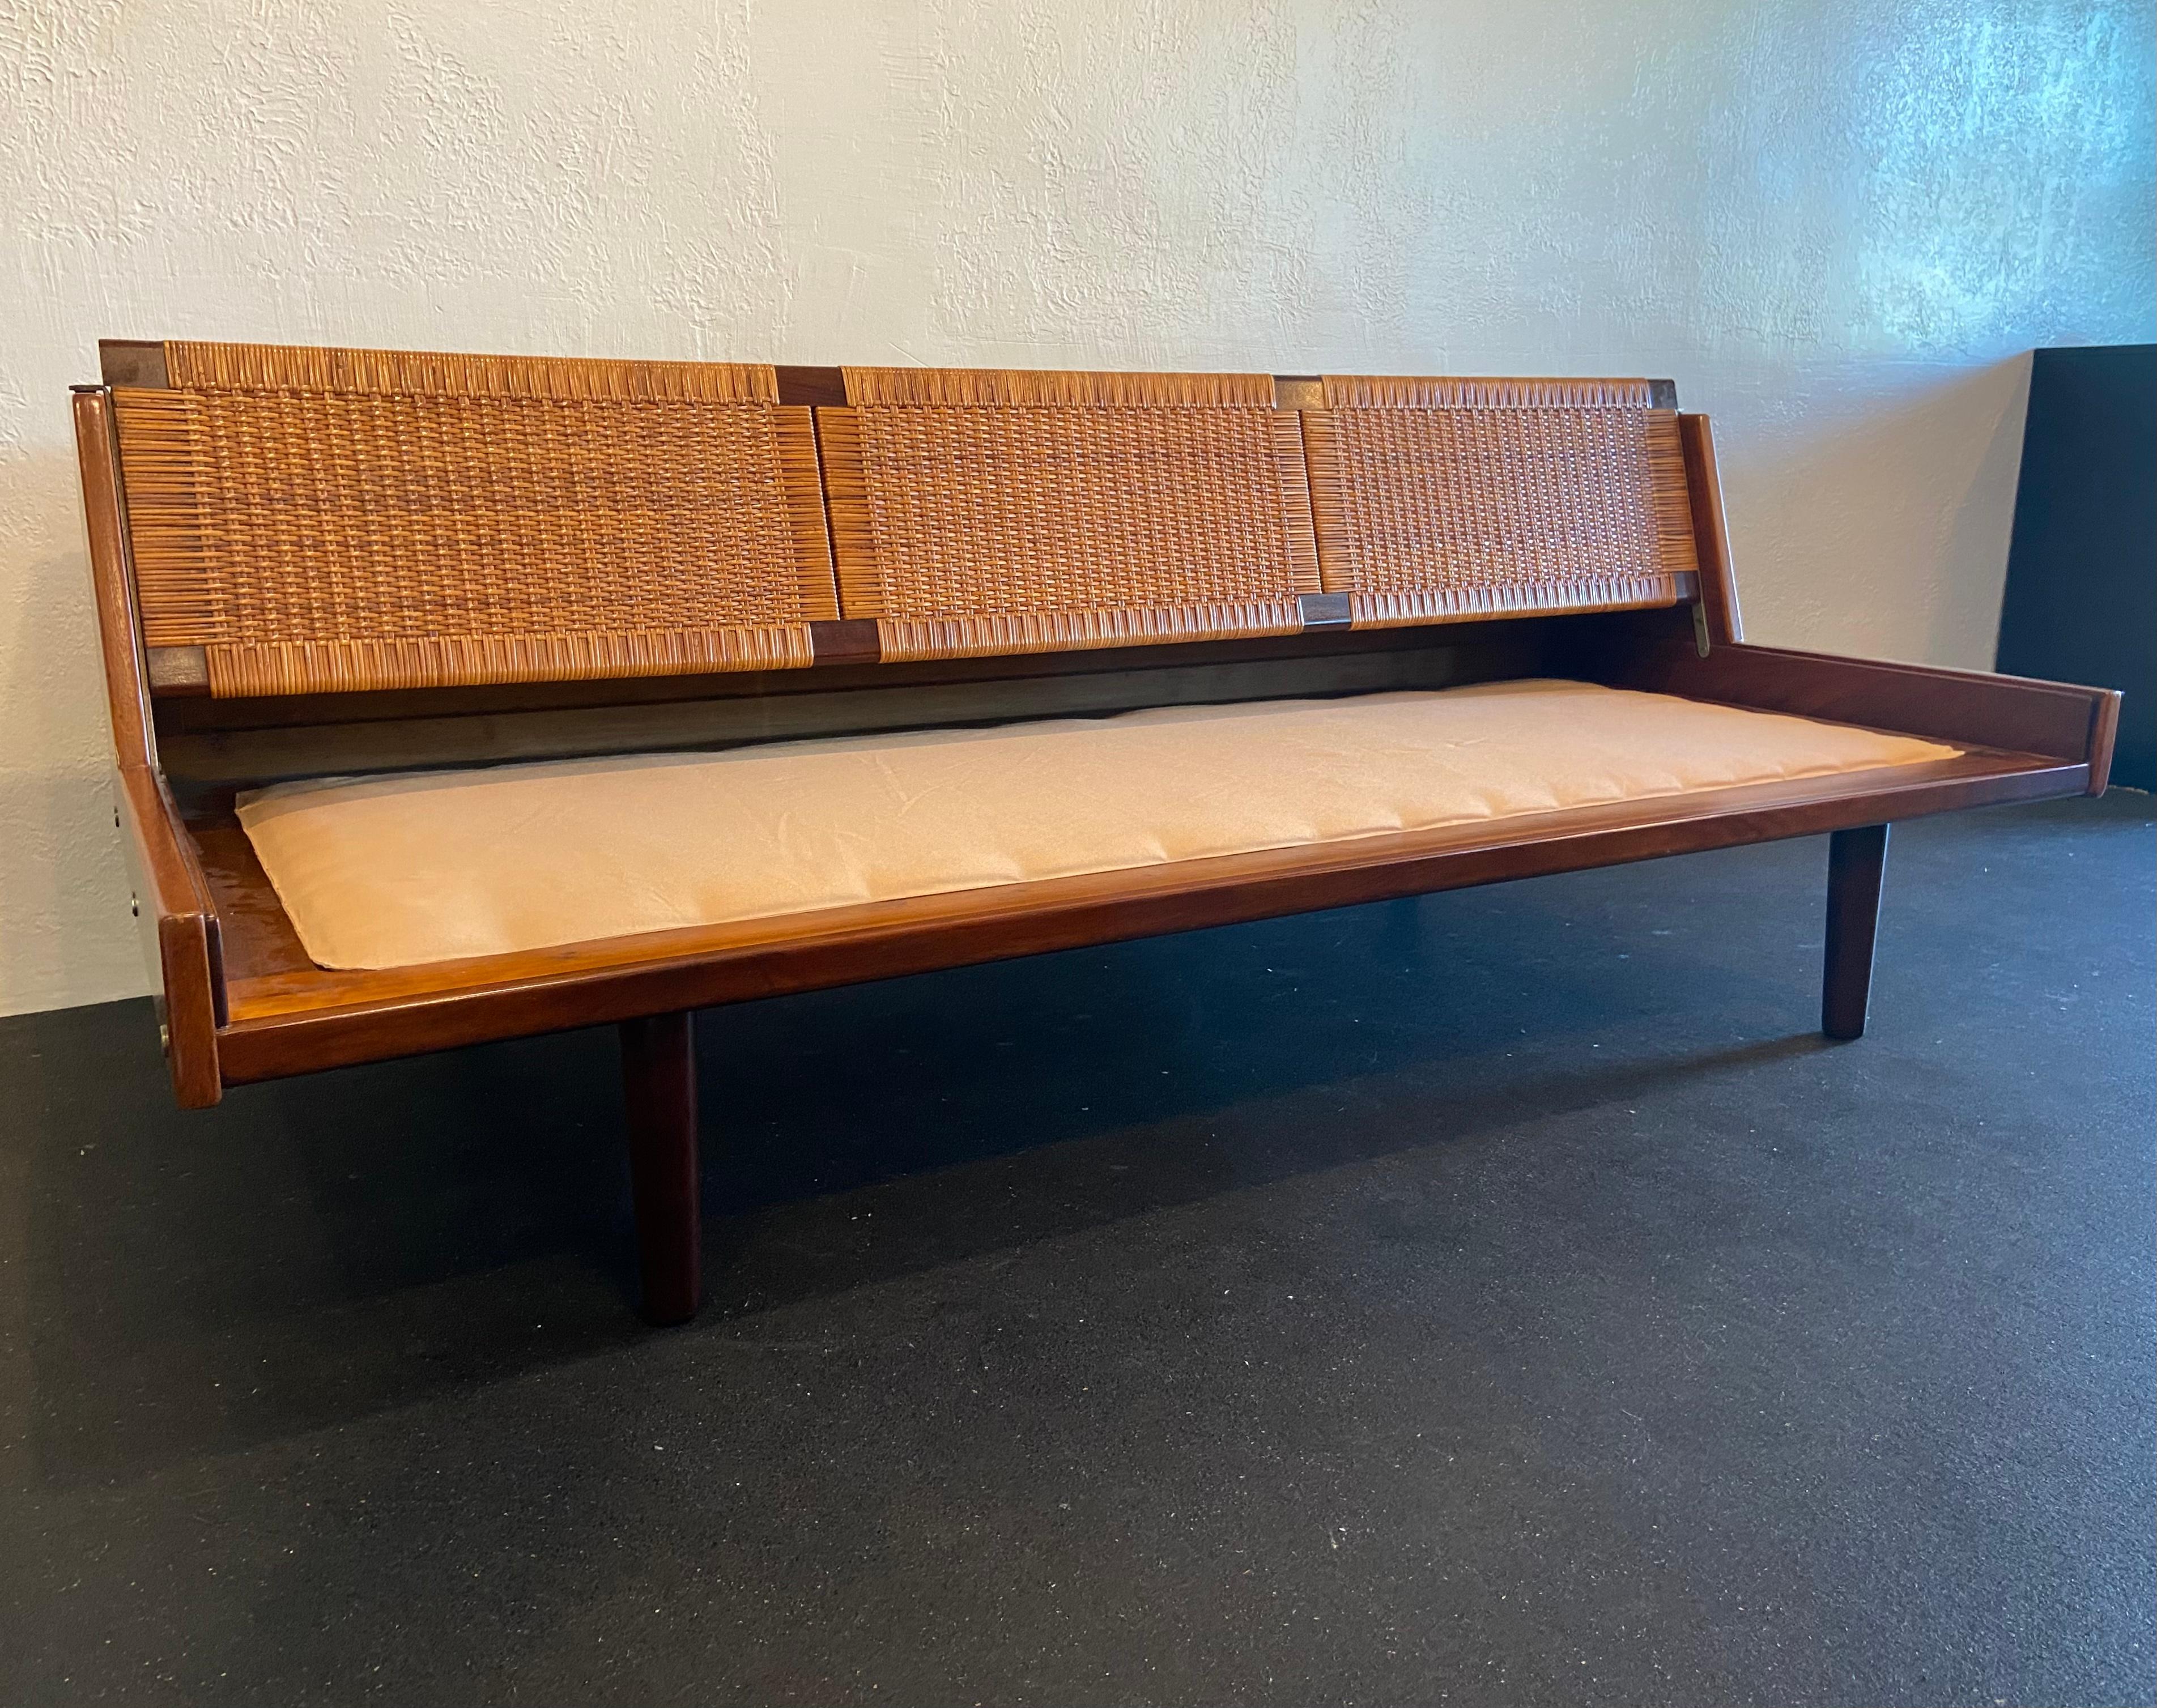 Hans J. Wegner for Getama GE-7 daybed. Rare walnut, teak and cane combination. Original leather cushion with warm patina. Daybed has been refinished. 

Would work well in a variety of interiors such as modern, mid century modern, Hollywood